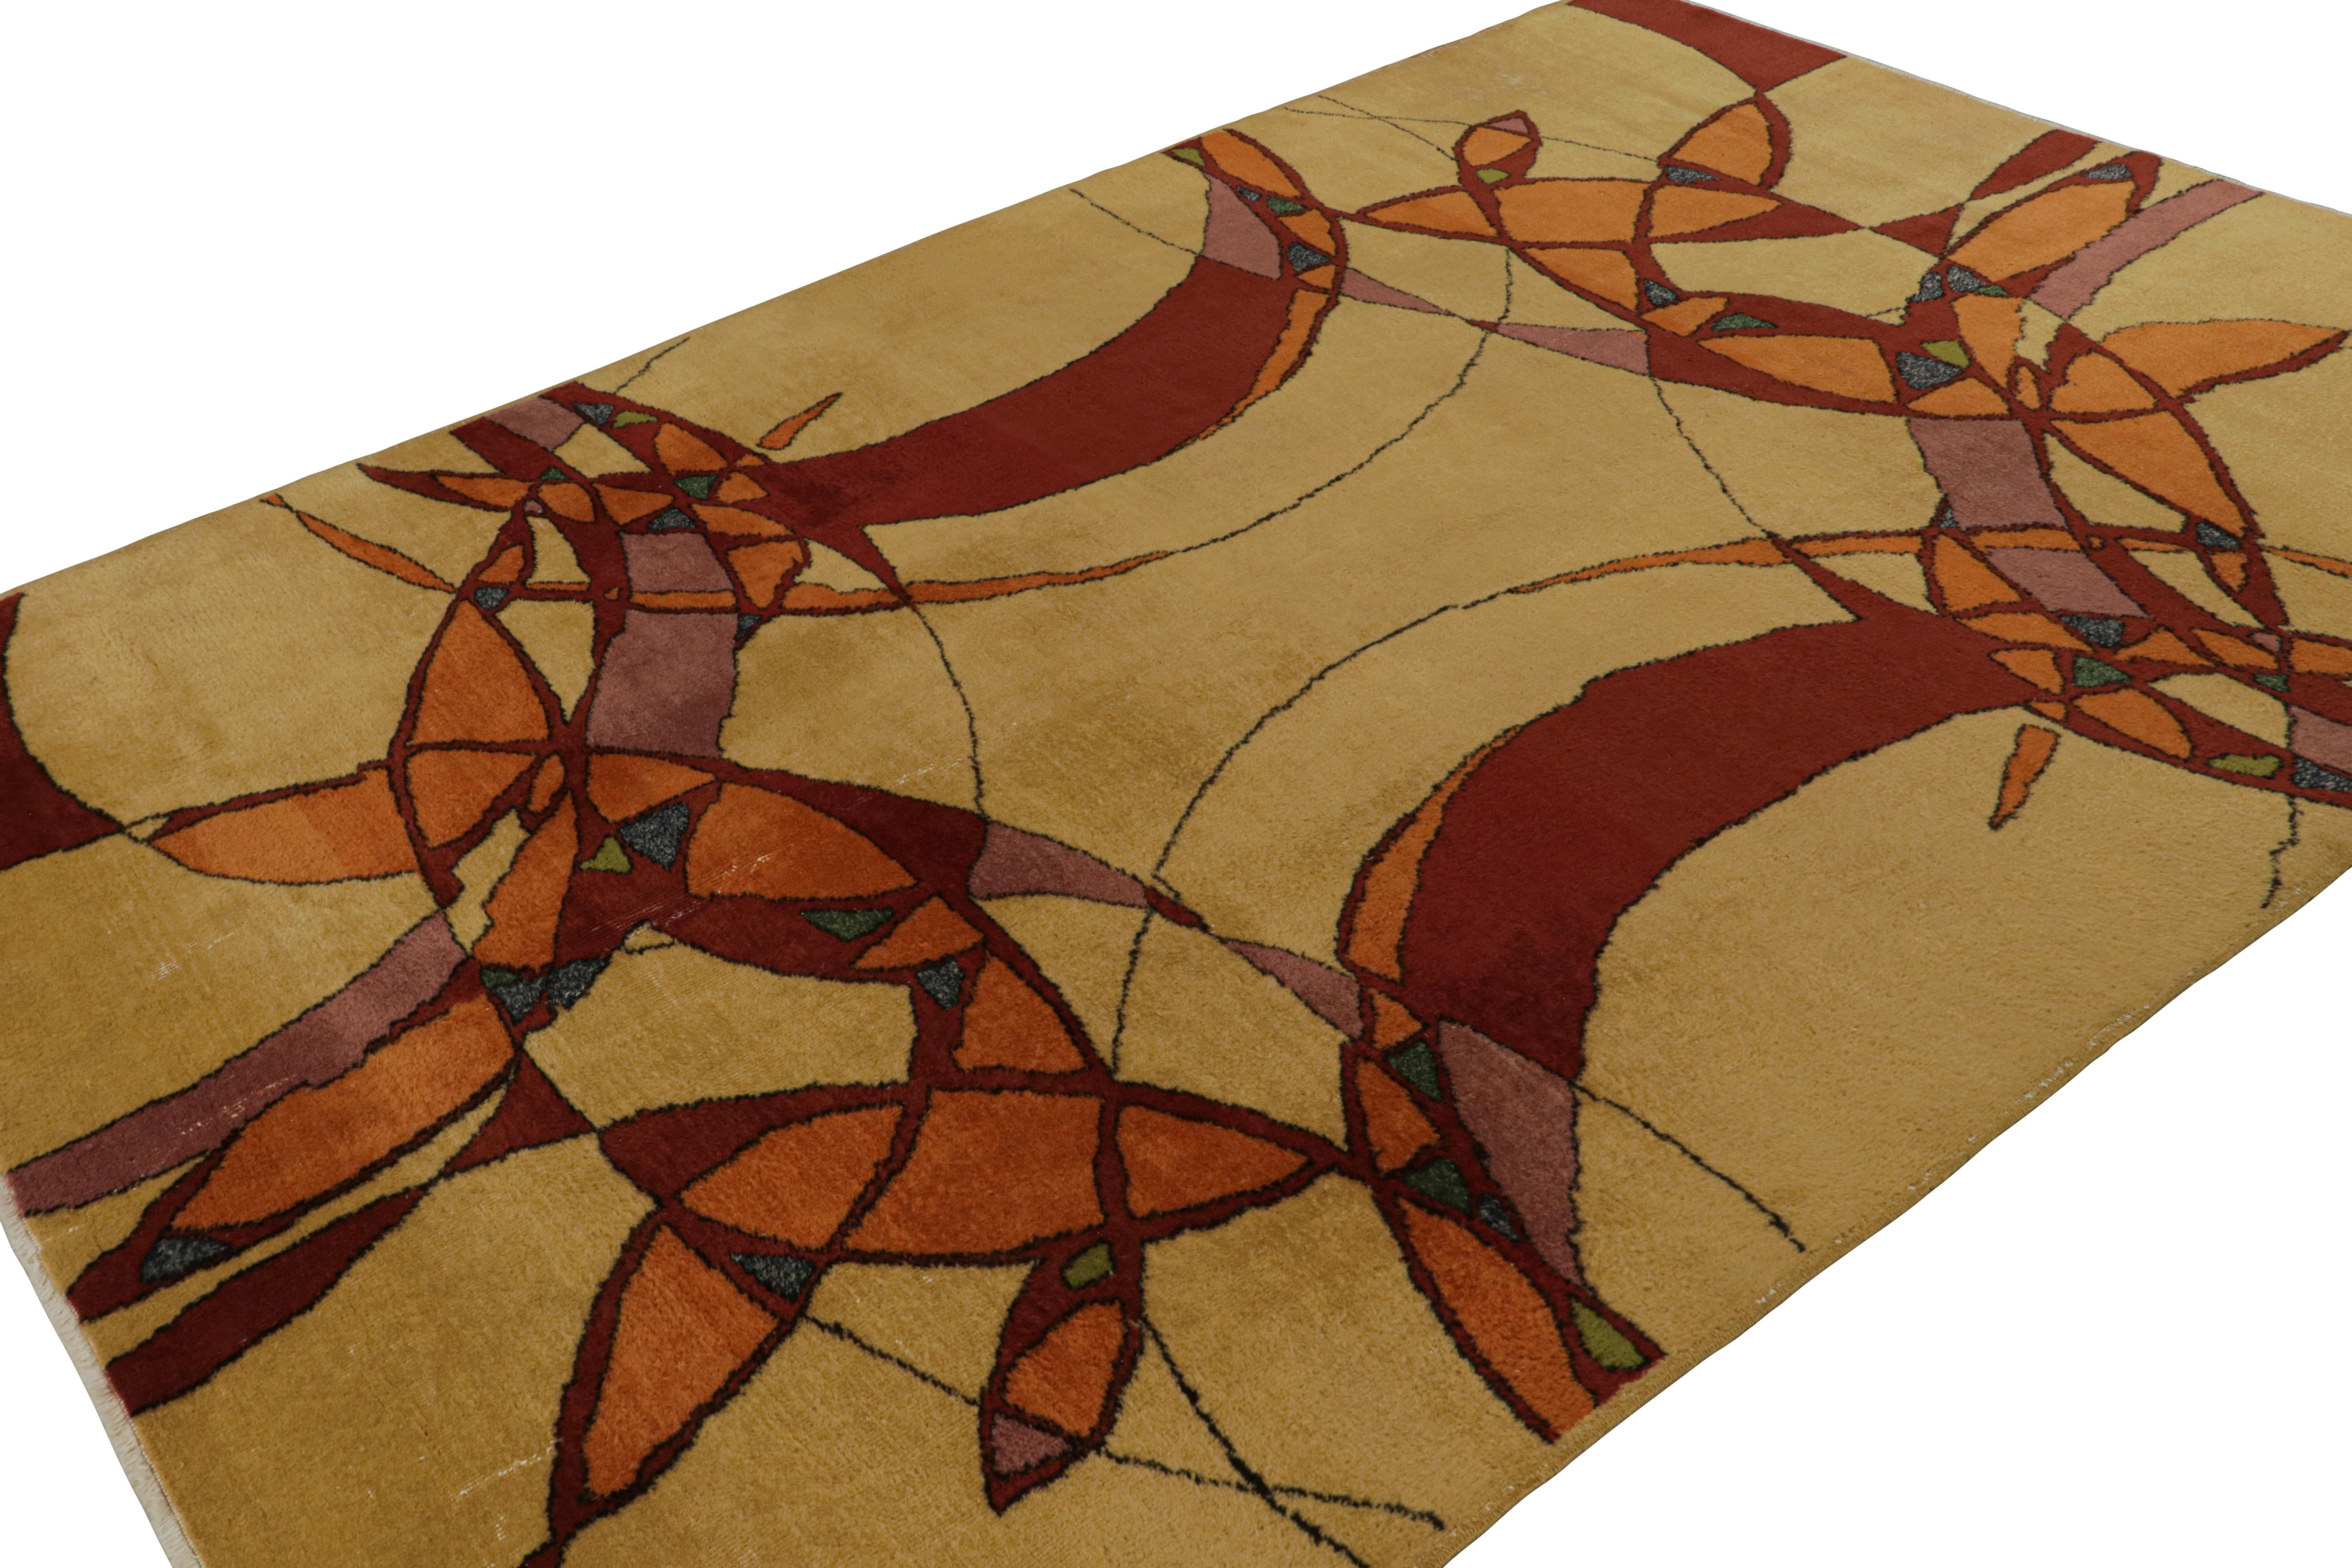 Hand-knotted in wool, circa 1960 - 1970, this 4x6 vintage Müren Art Deco rug is an exciting new curation from Rug & Kilim. Its design nods to the atomic age and mid-century modern sensibilities, making it a rare Müren art piece.  

On the design: